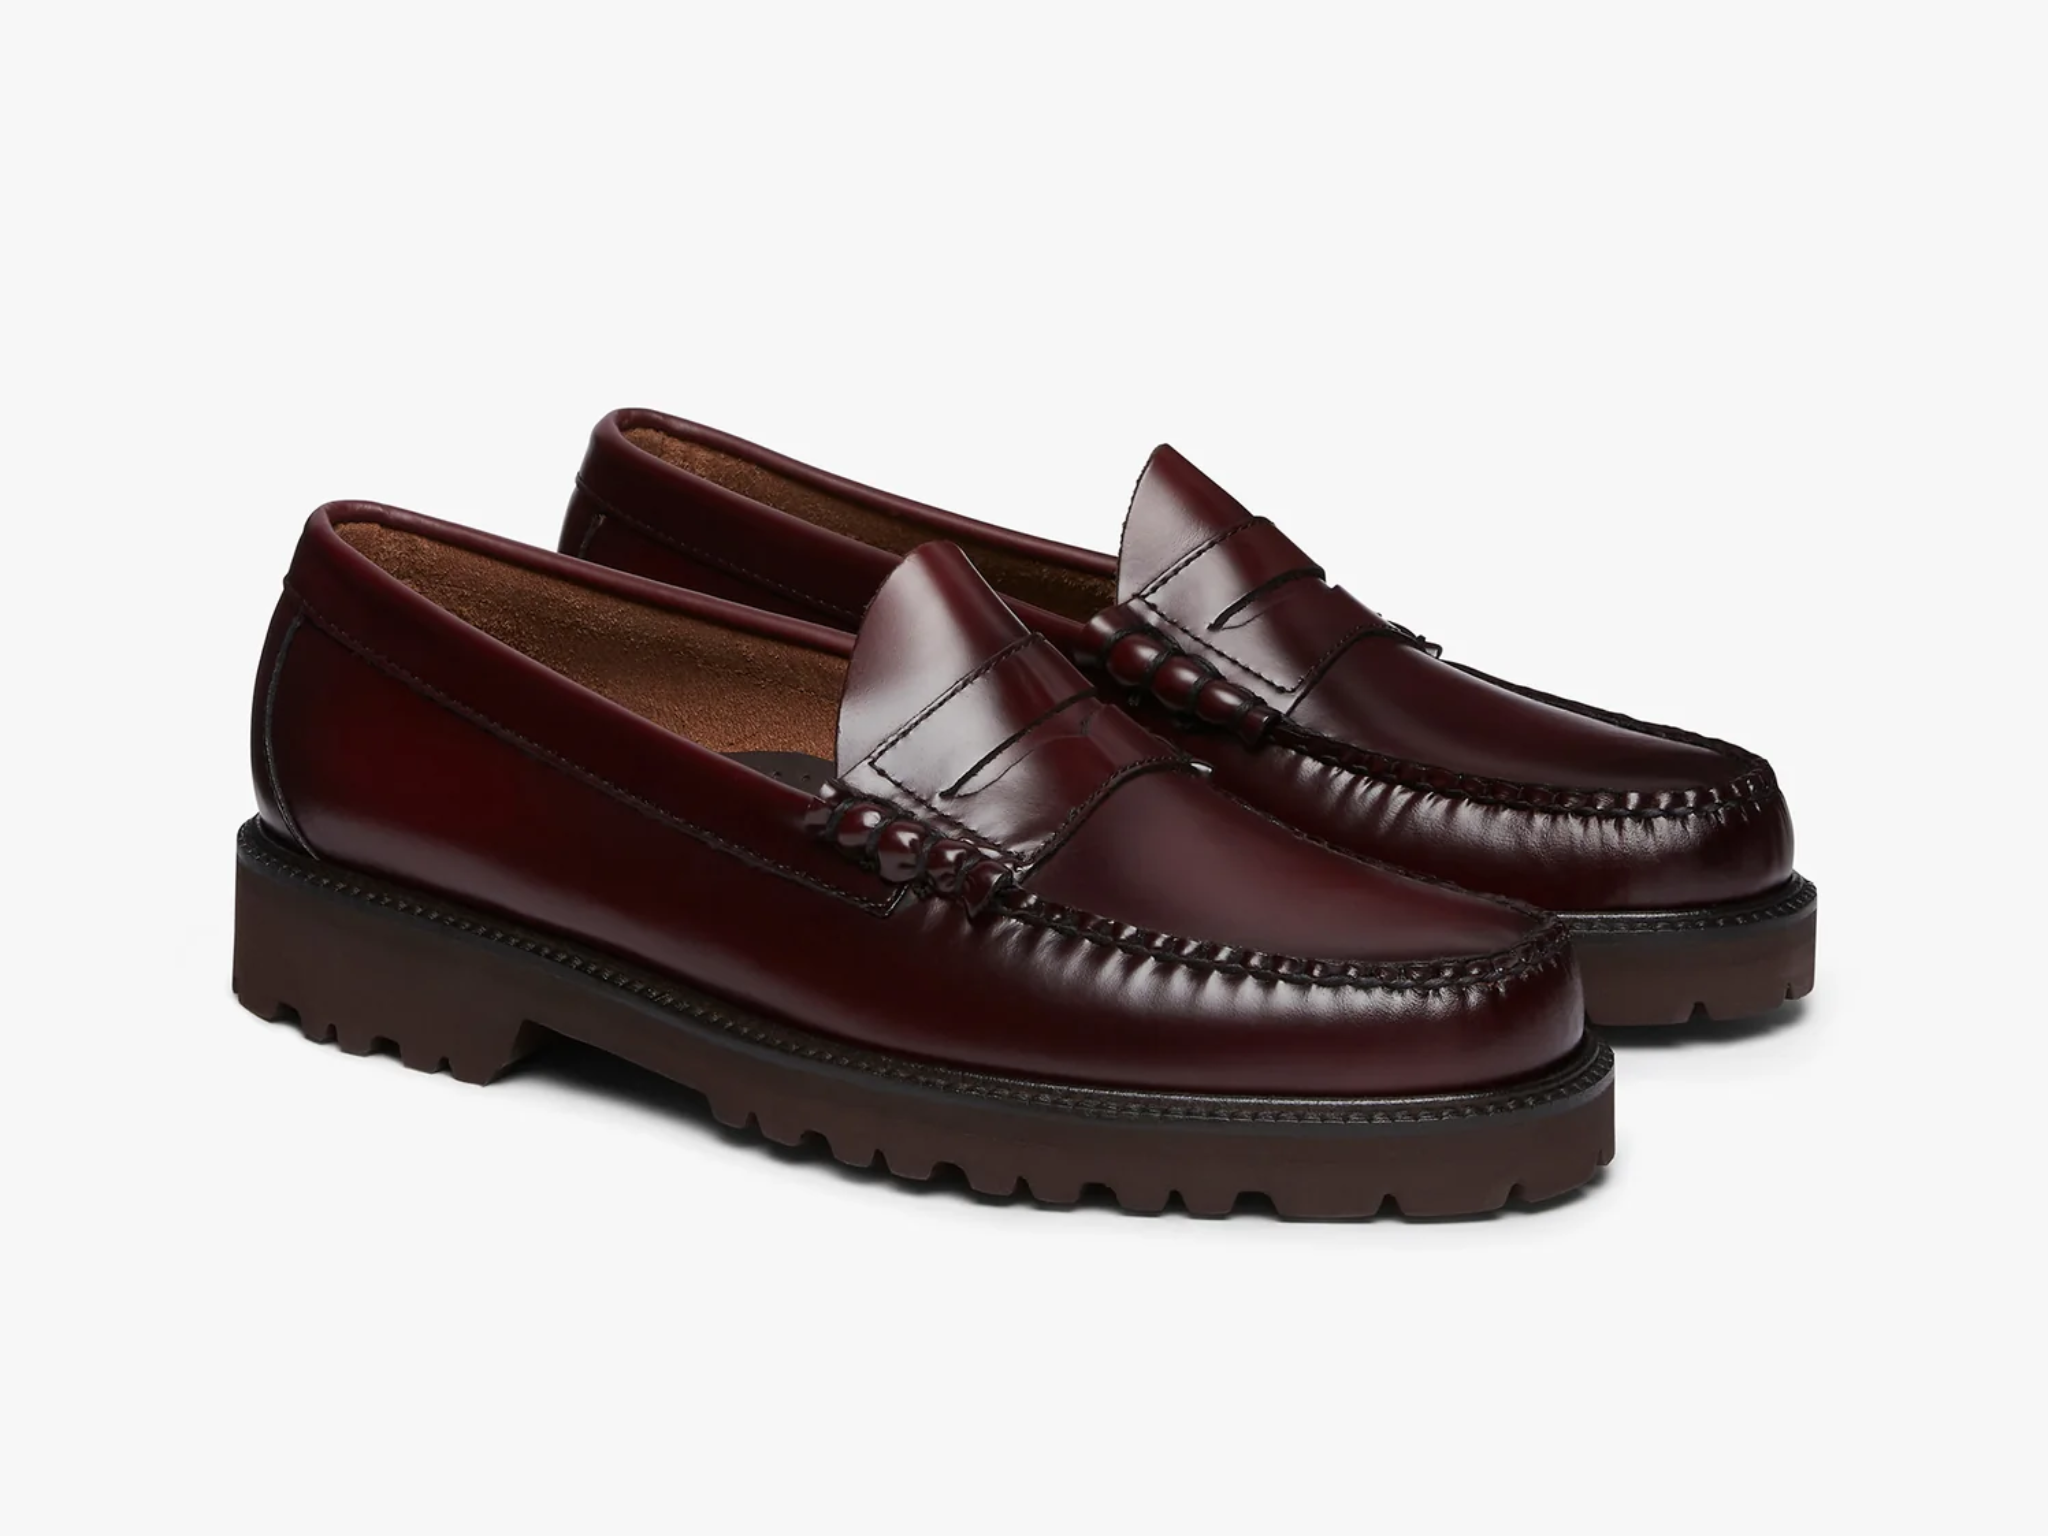 G.H. Bass weejuns 90s larson penny loafers